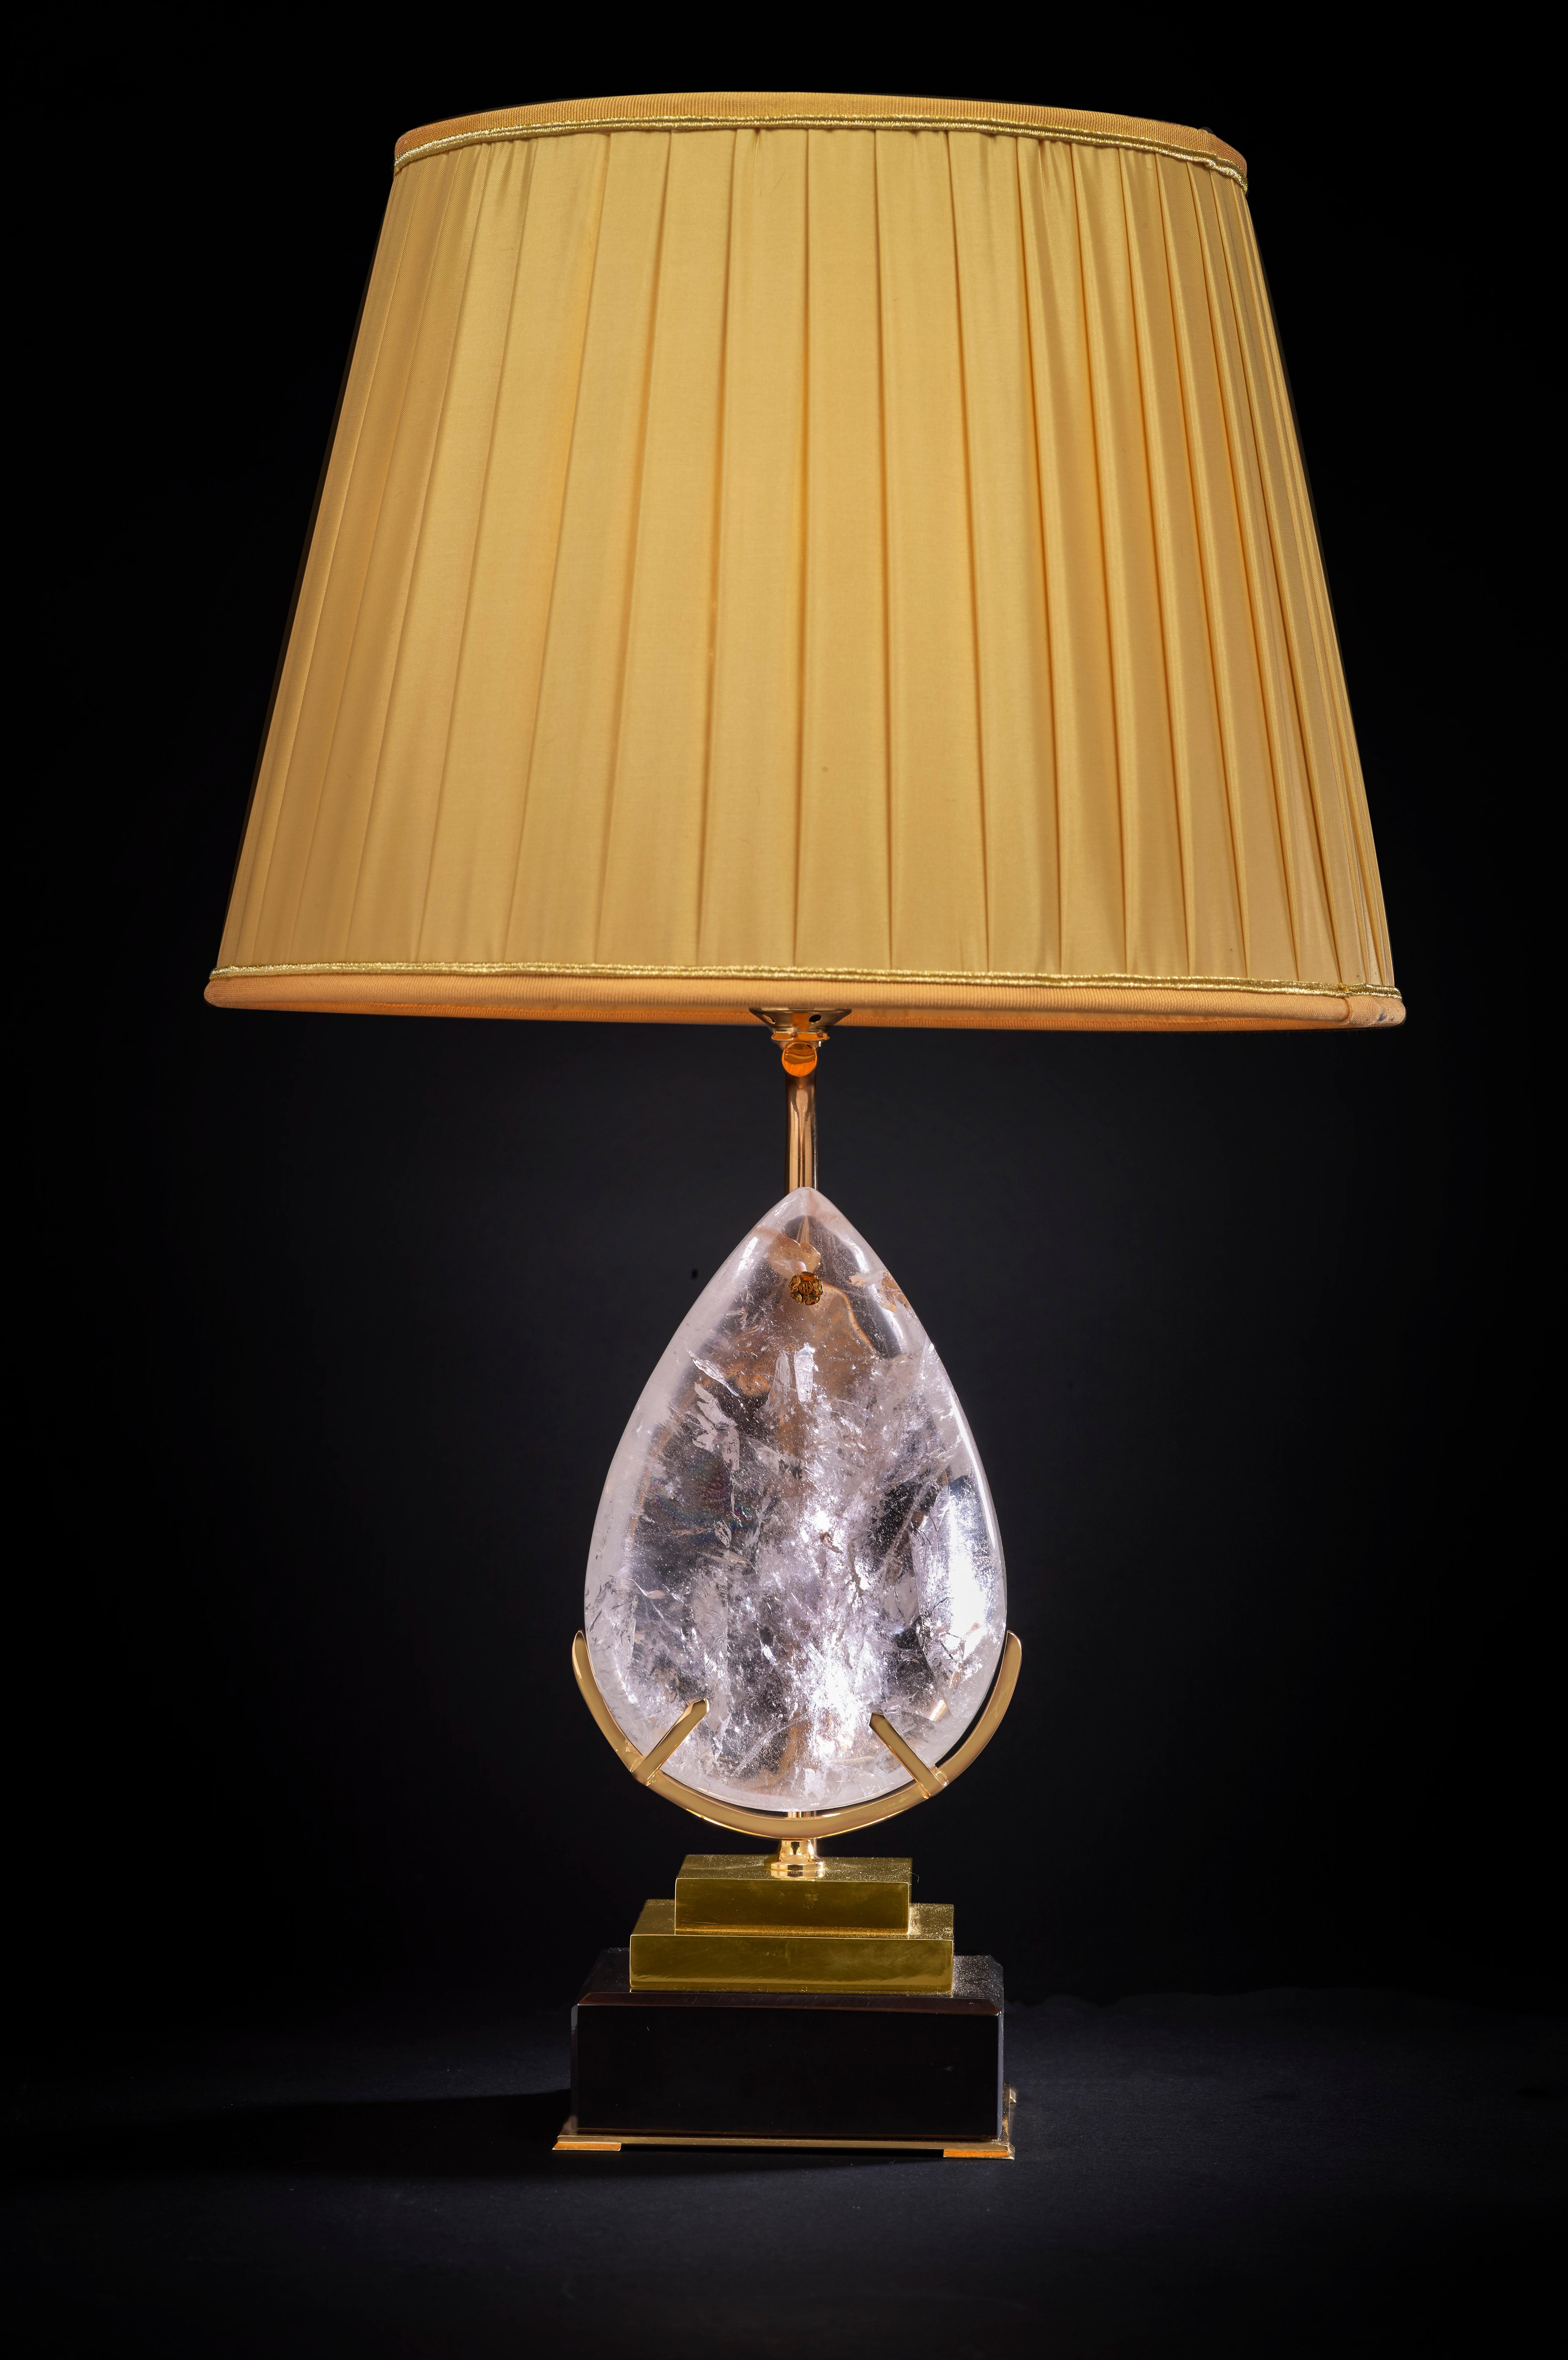 Belgian black marble lamp with an amazing big rock crystal pear.
24-karat ormolu gilding cover the brass steps.
Lampshade handmade and customized for this lamp.
Could be by request be made in a different color.
Unique piece.
Made in France.